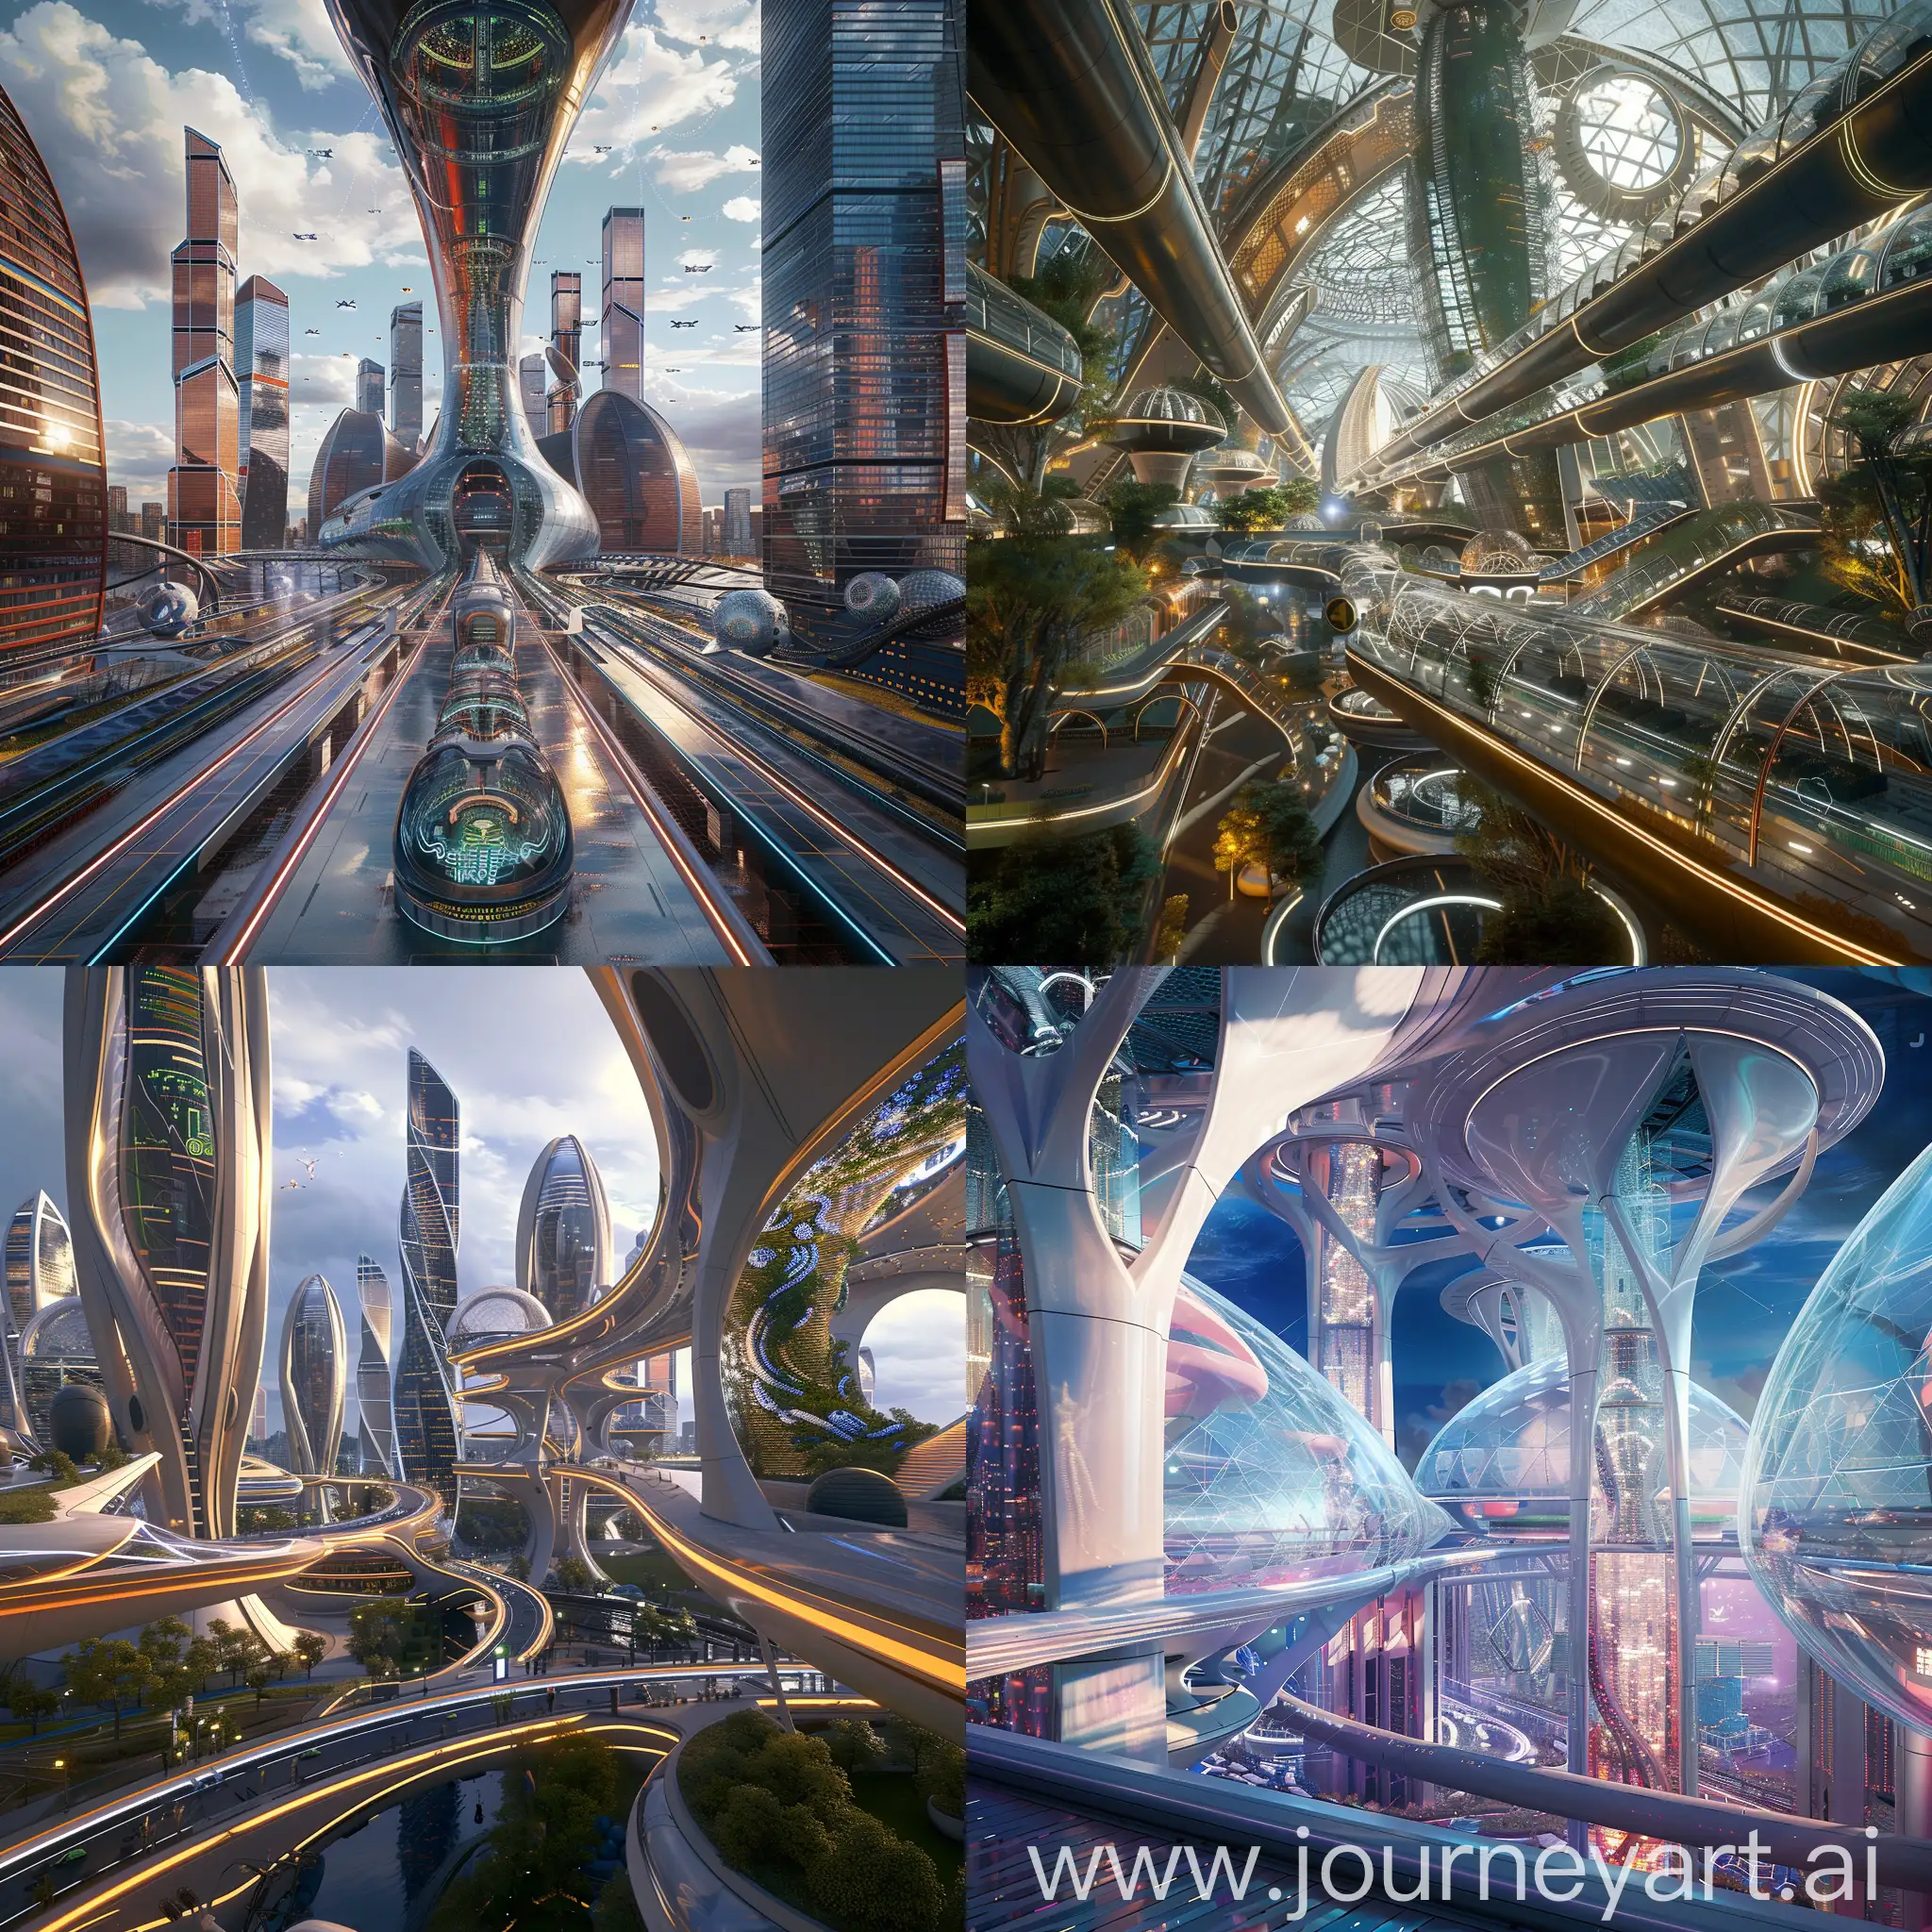 Futuristic-Moscow-NeuroWires-and-BioOrganic-Power-Cells-in-Hyperconductive-Transit-Tubes